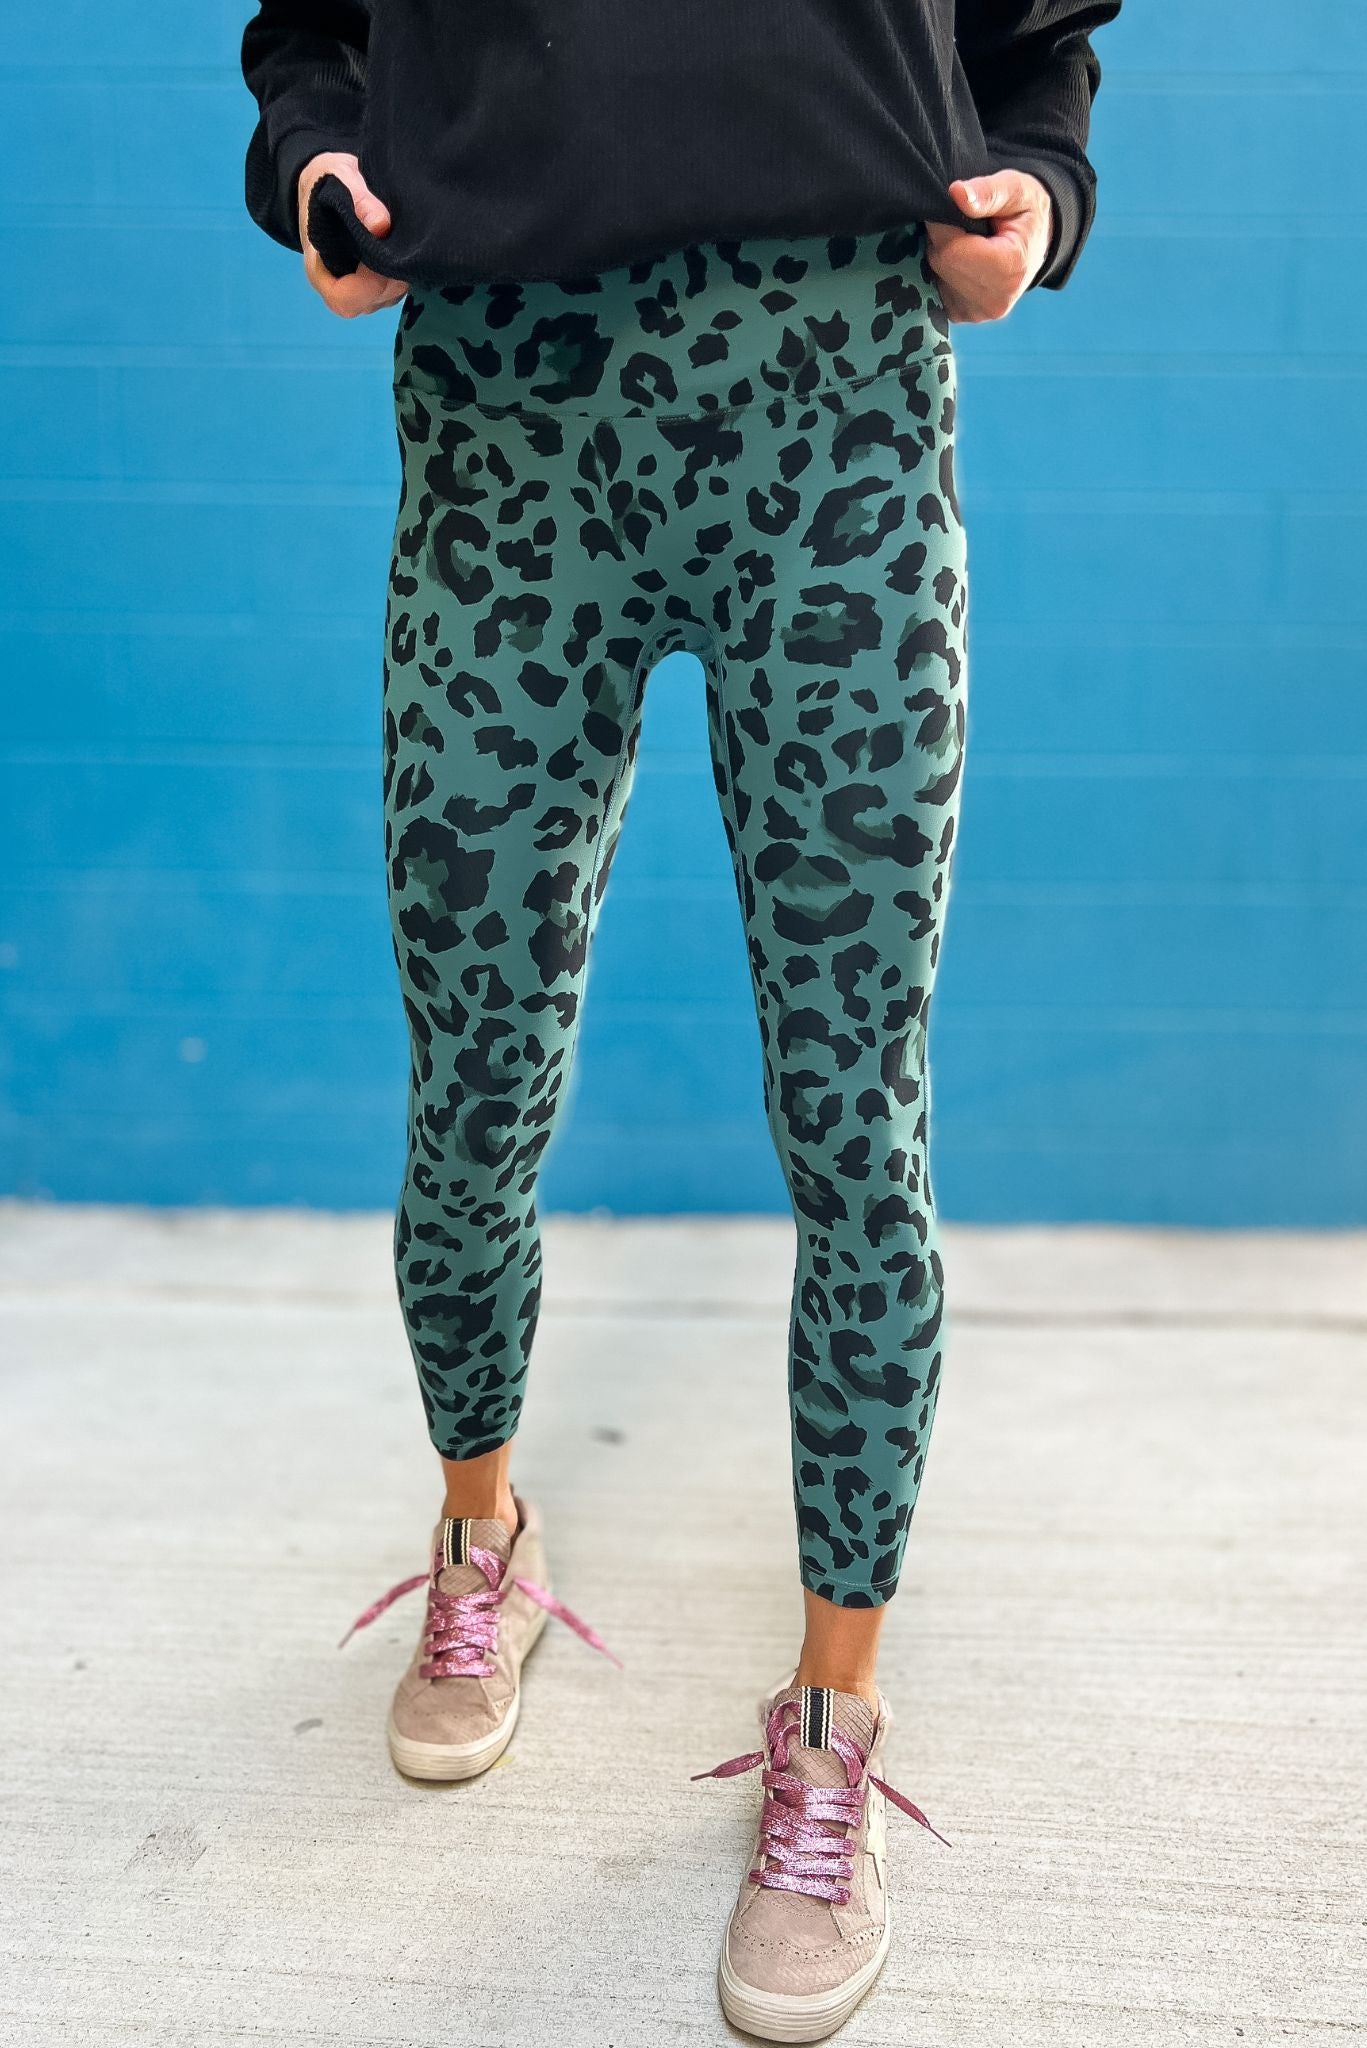 green Animal Print Active Leggings SSYS The Label, leggings, fall fashion, must have, mom wear, every day wear, athleisure, shop style your senses by mallory fitzsimmons